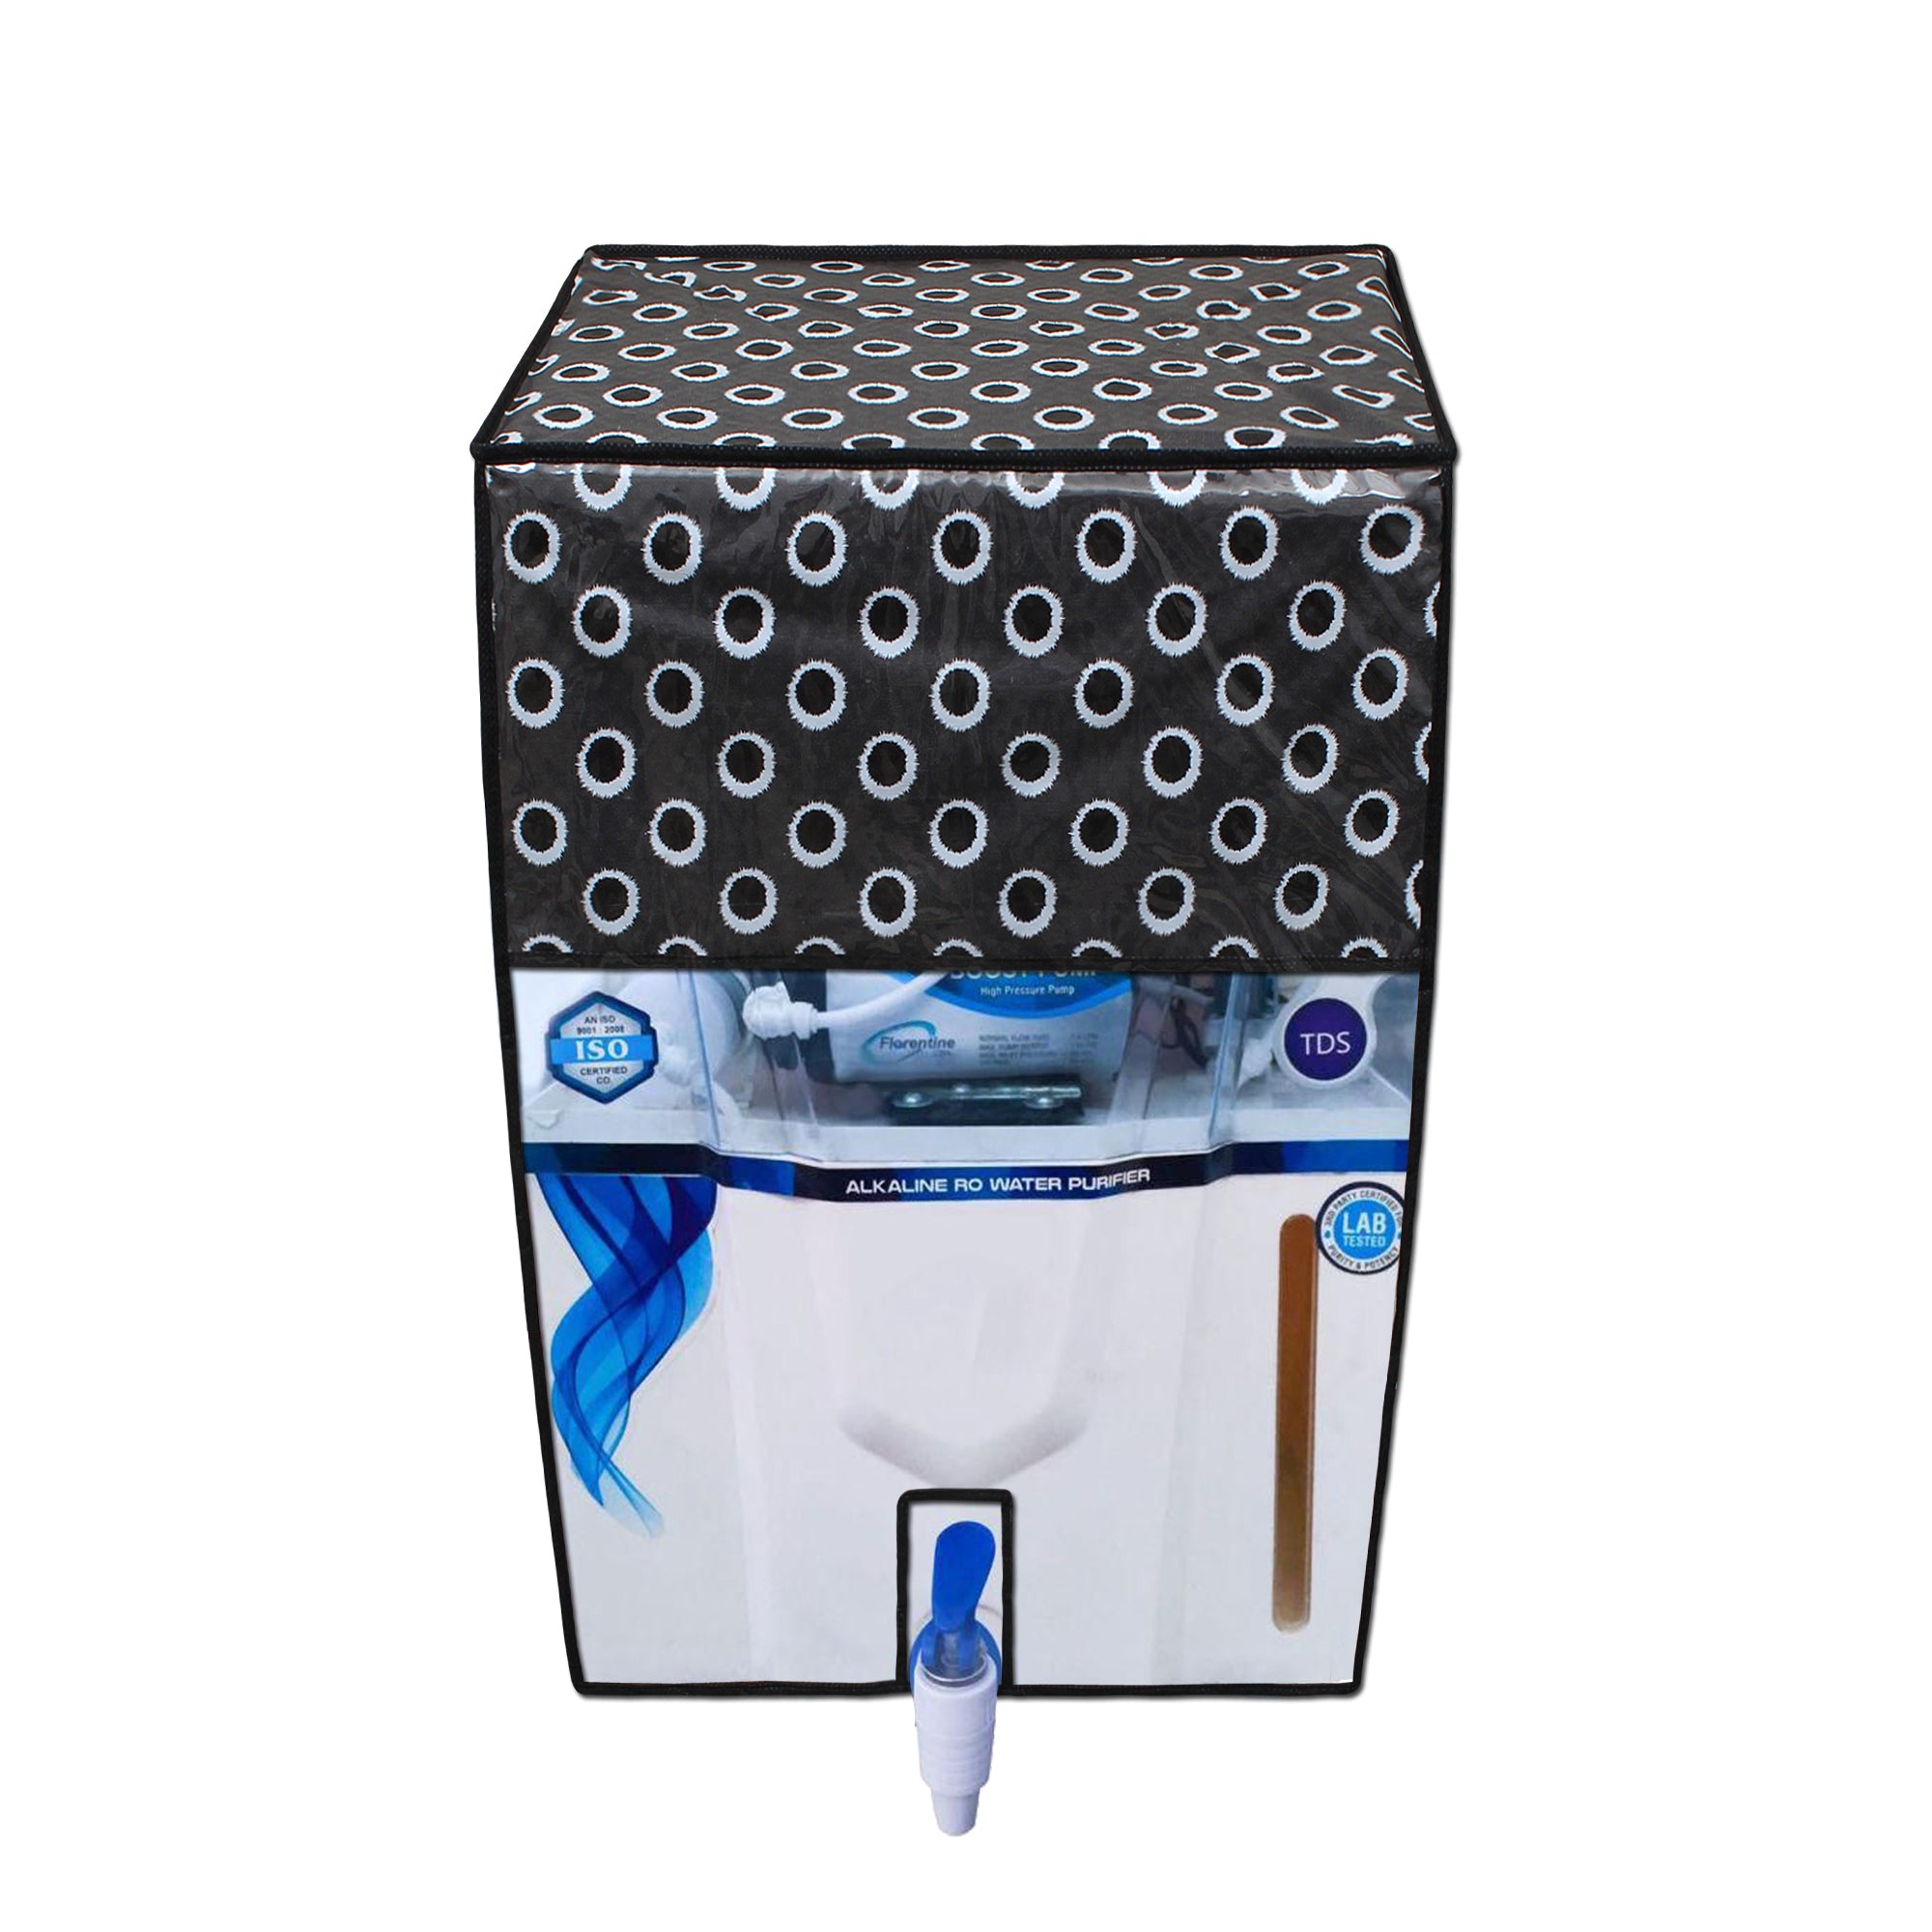 Waterproof & Dustproof Water Purifier RO Cover, SA17 - Dream Care Furnishings Private Limited